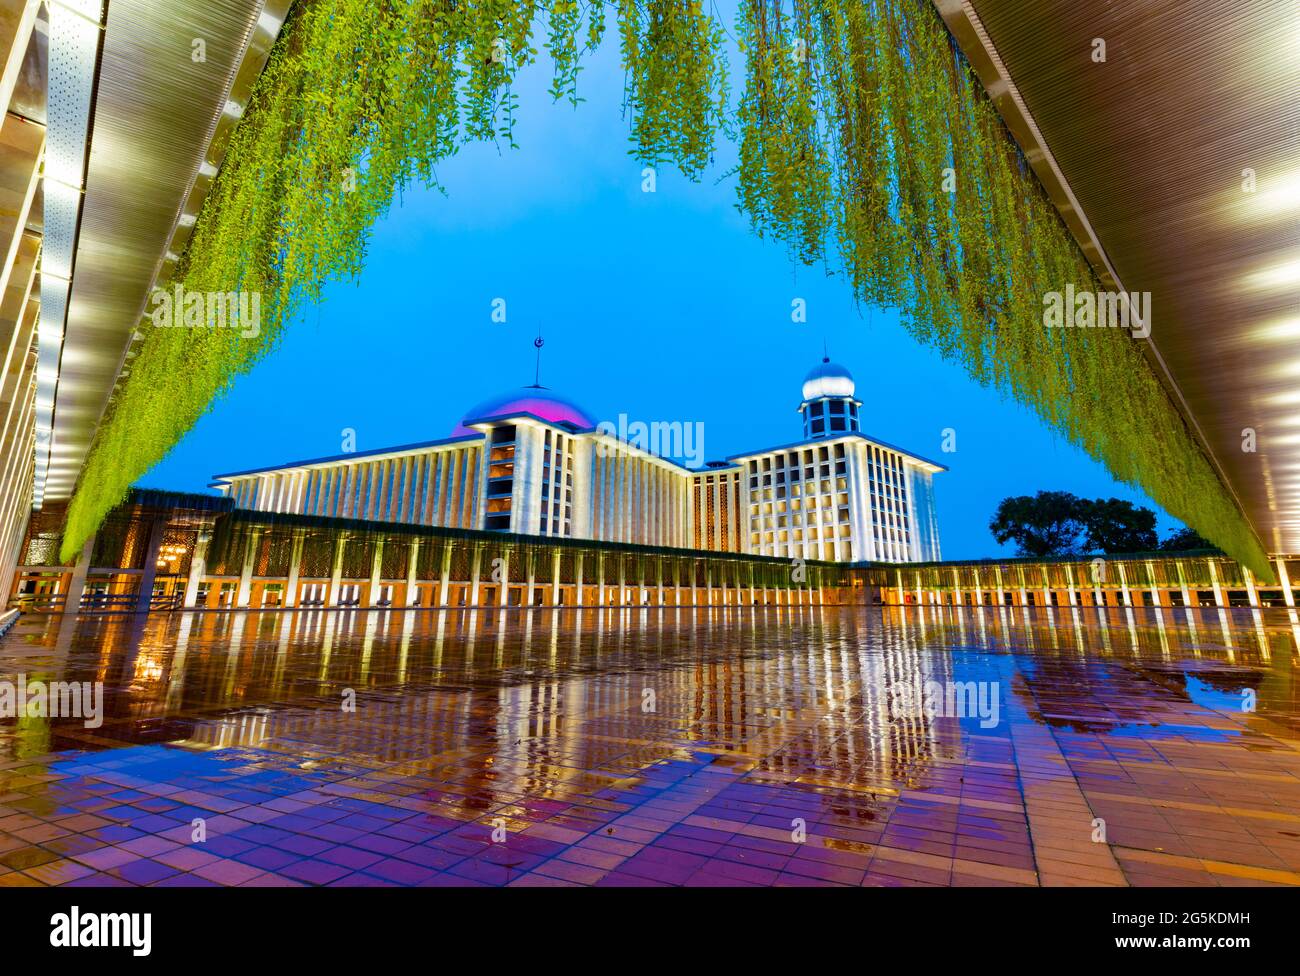 Jakarta, Indonesia - CIRCA June 2021: Exterior of the new Istiqlal Mosque in Jakarta, after renovation in the year 2020, in rainy sunset (blue hour) Stock Photo